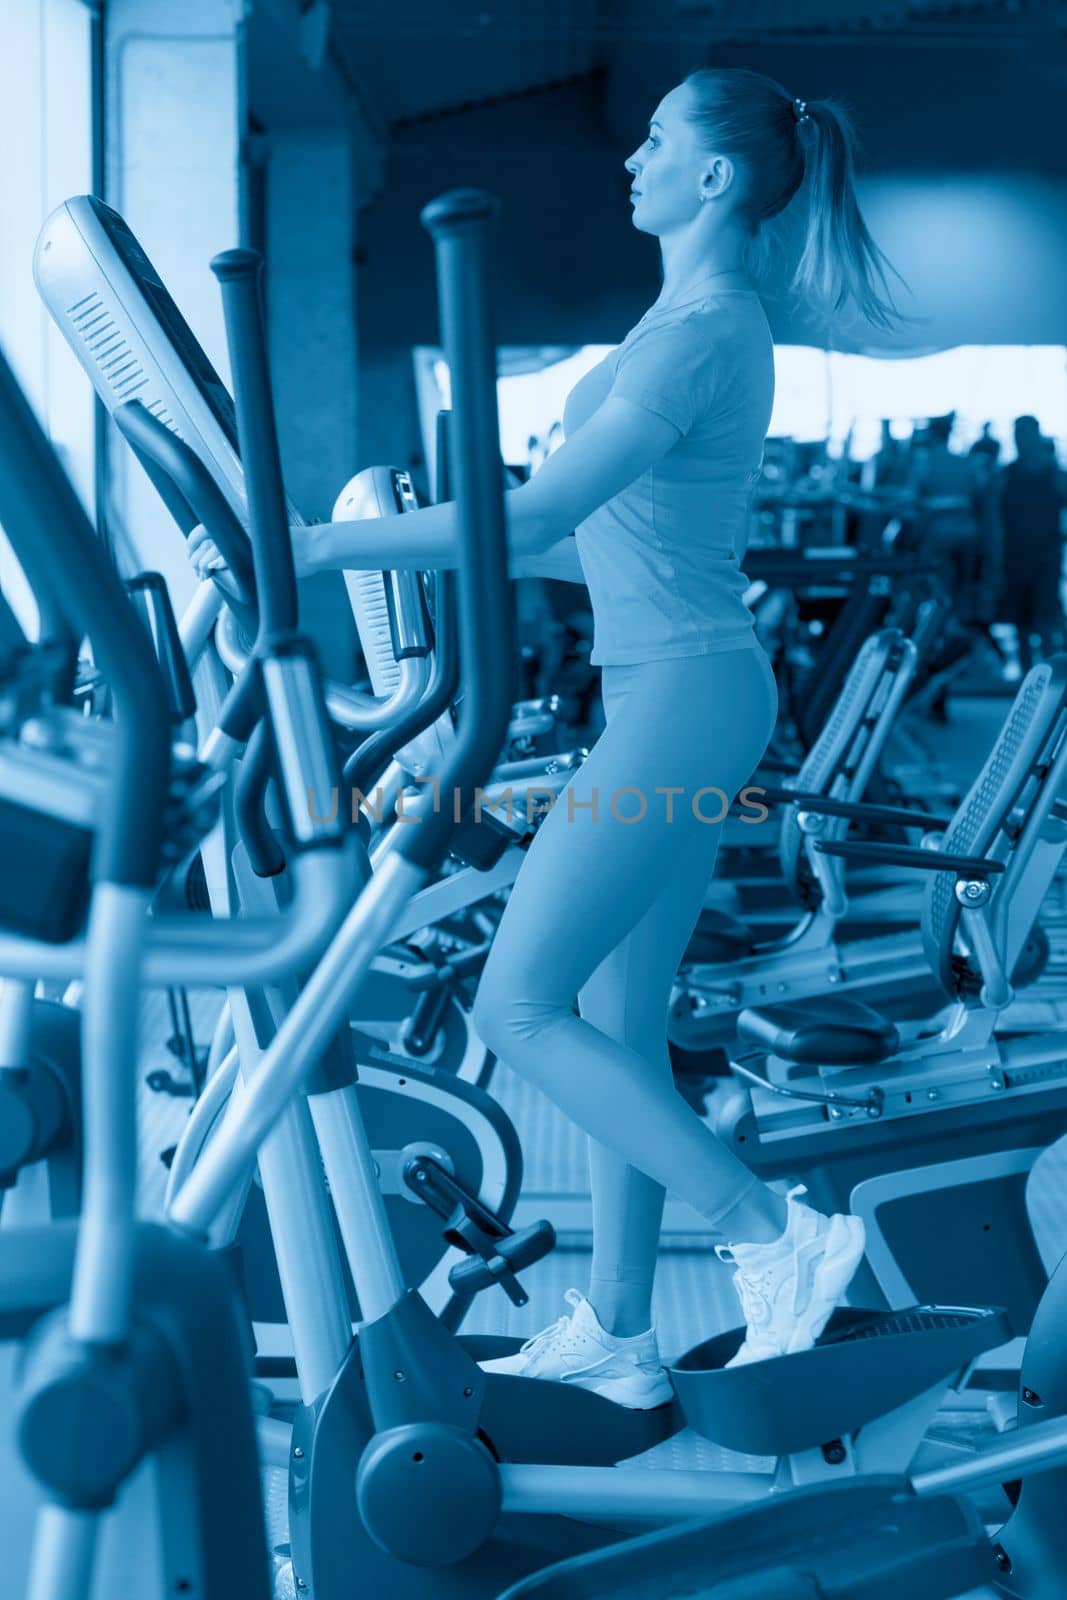 Woman Working Out On Elliptical Machine in gym by Mariakray